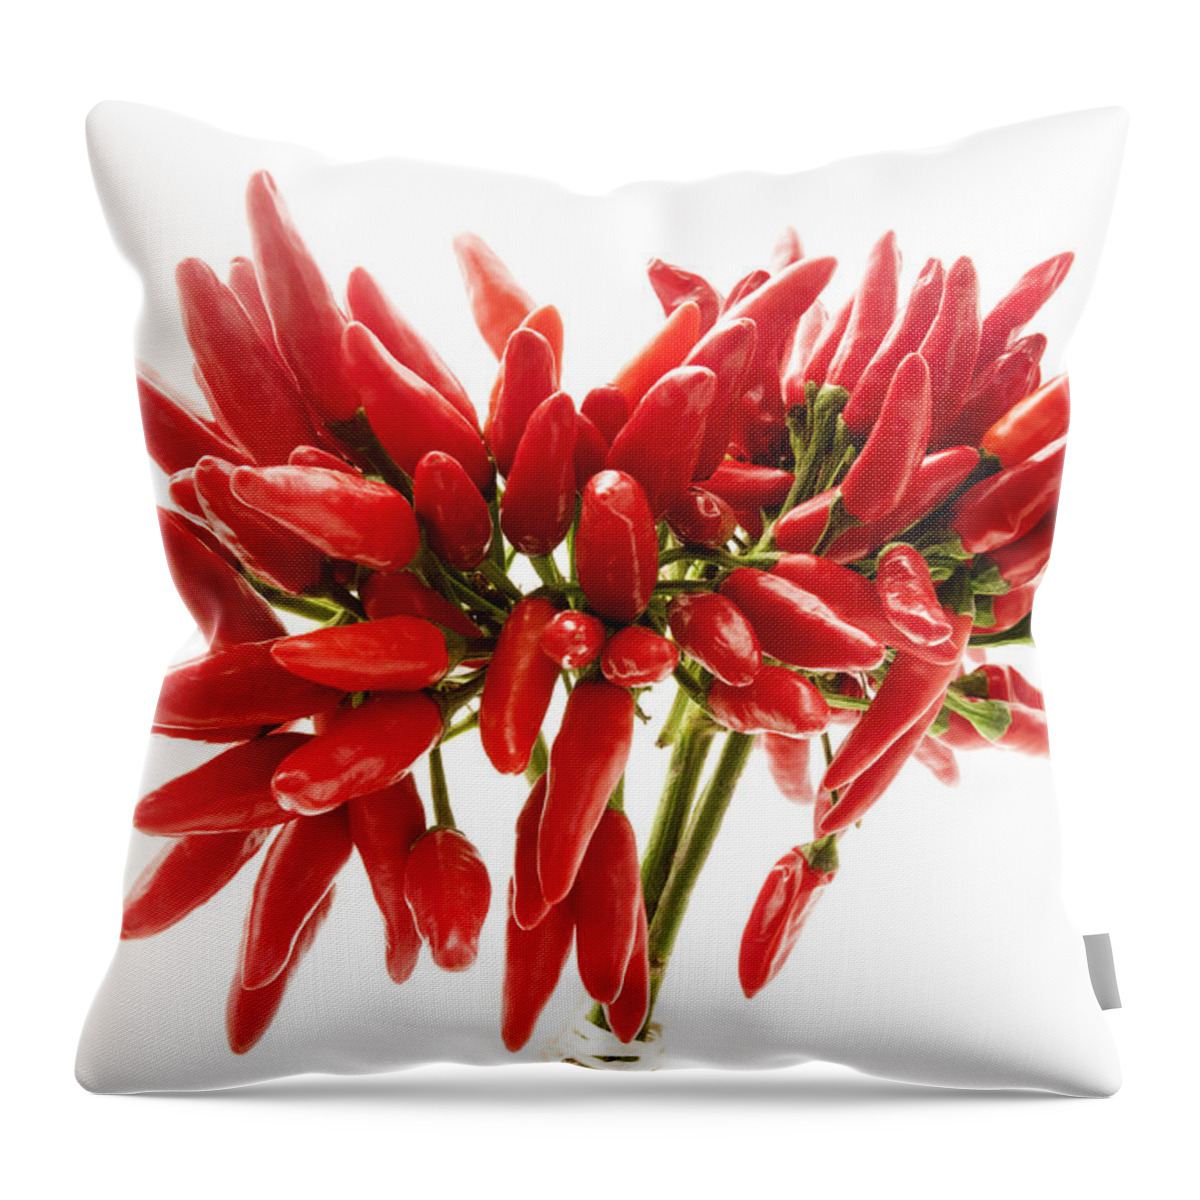 White Background Throw Pillow featuring the photograph Chili peppers by Fabrizio Troiani